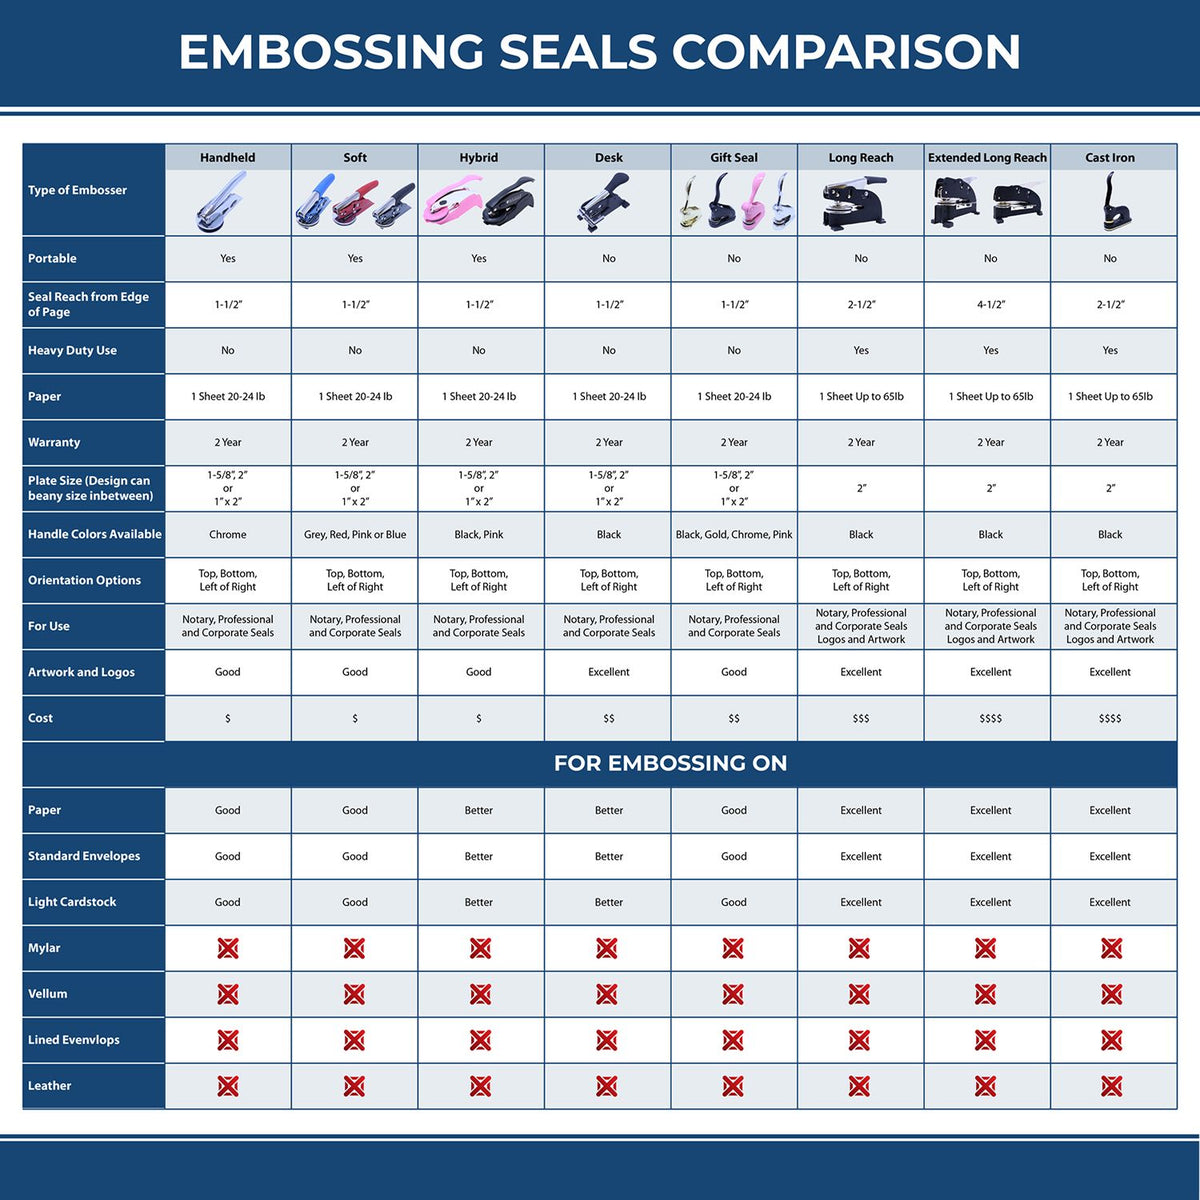 A comparison chart for the different types of mount models available for the Soft Pocket District of Columbia Landscape Architect Embosser.